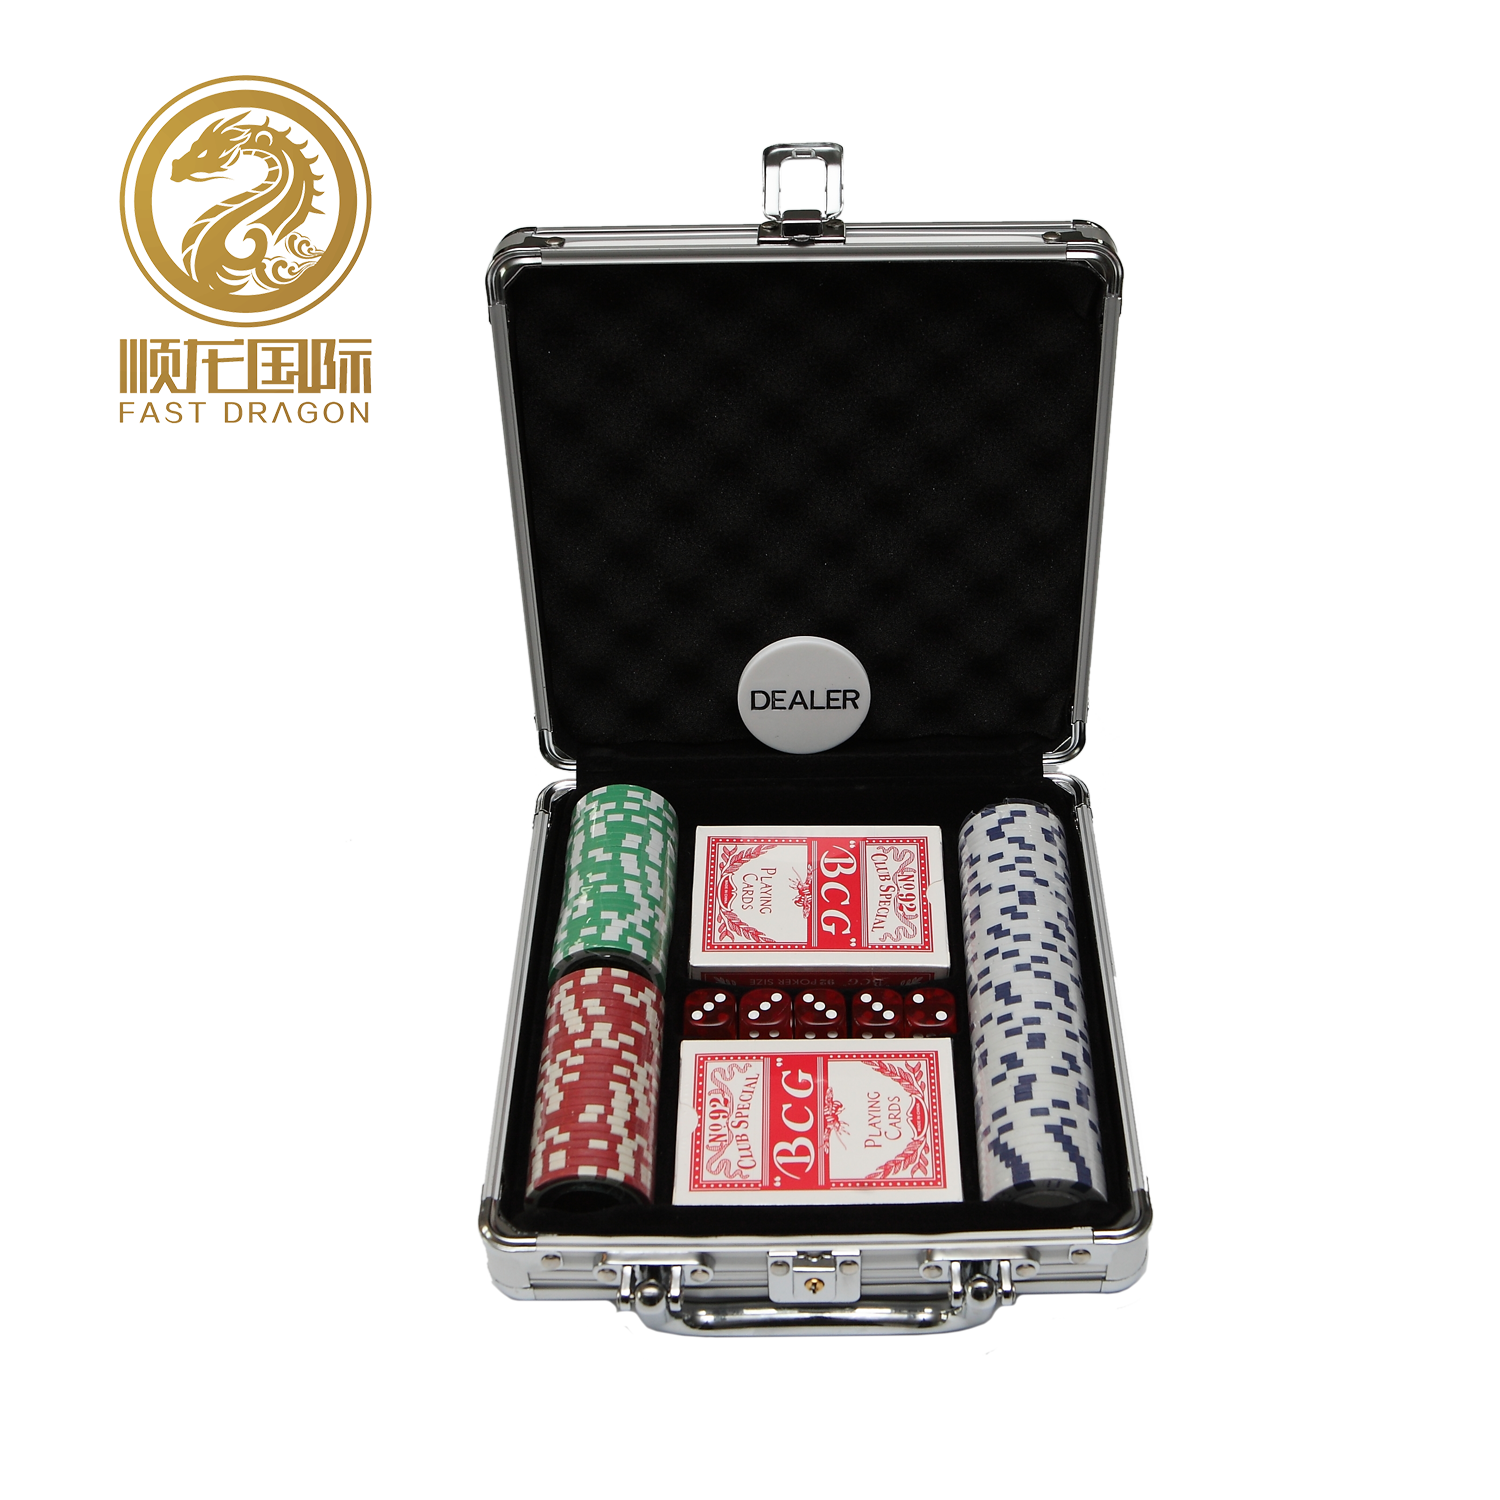 DRA-GB2003 11.5g ABS Casino Texas Poker Chips Sets with Rounded Corner Aluminum Case 